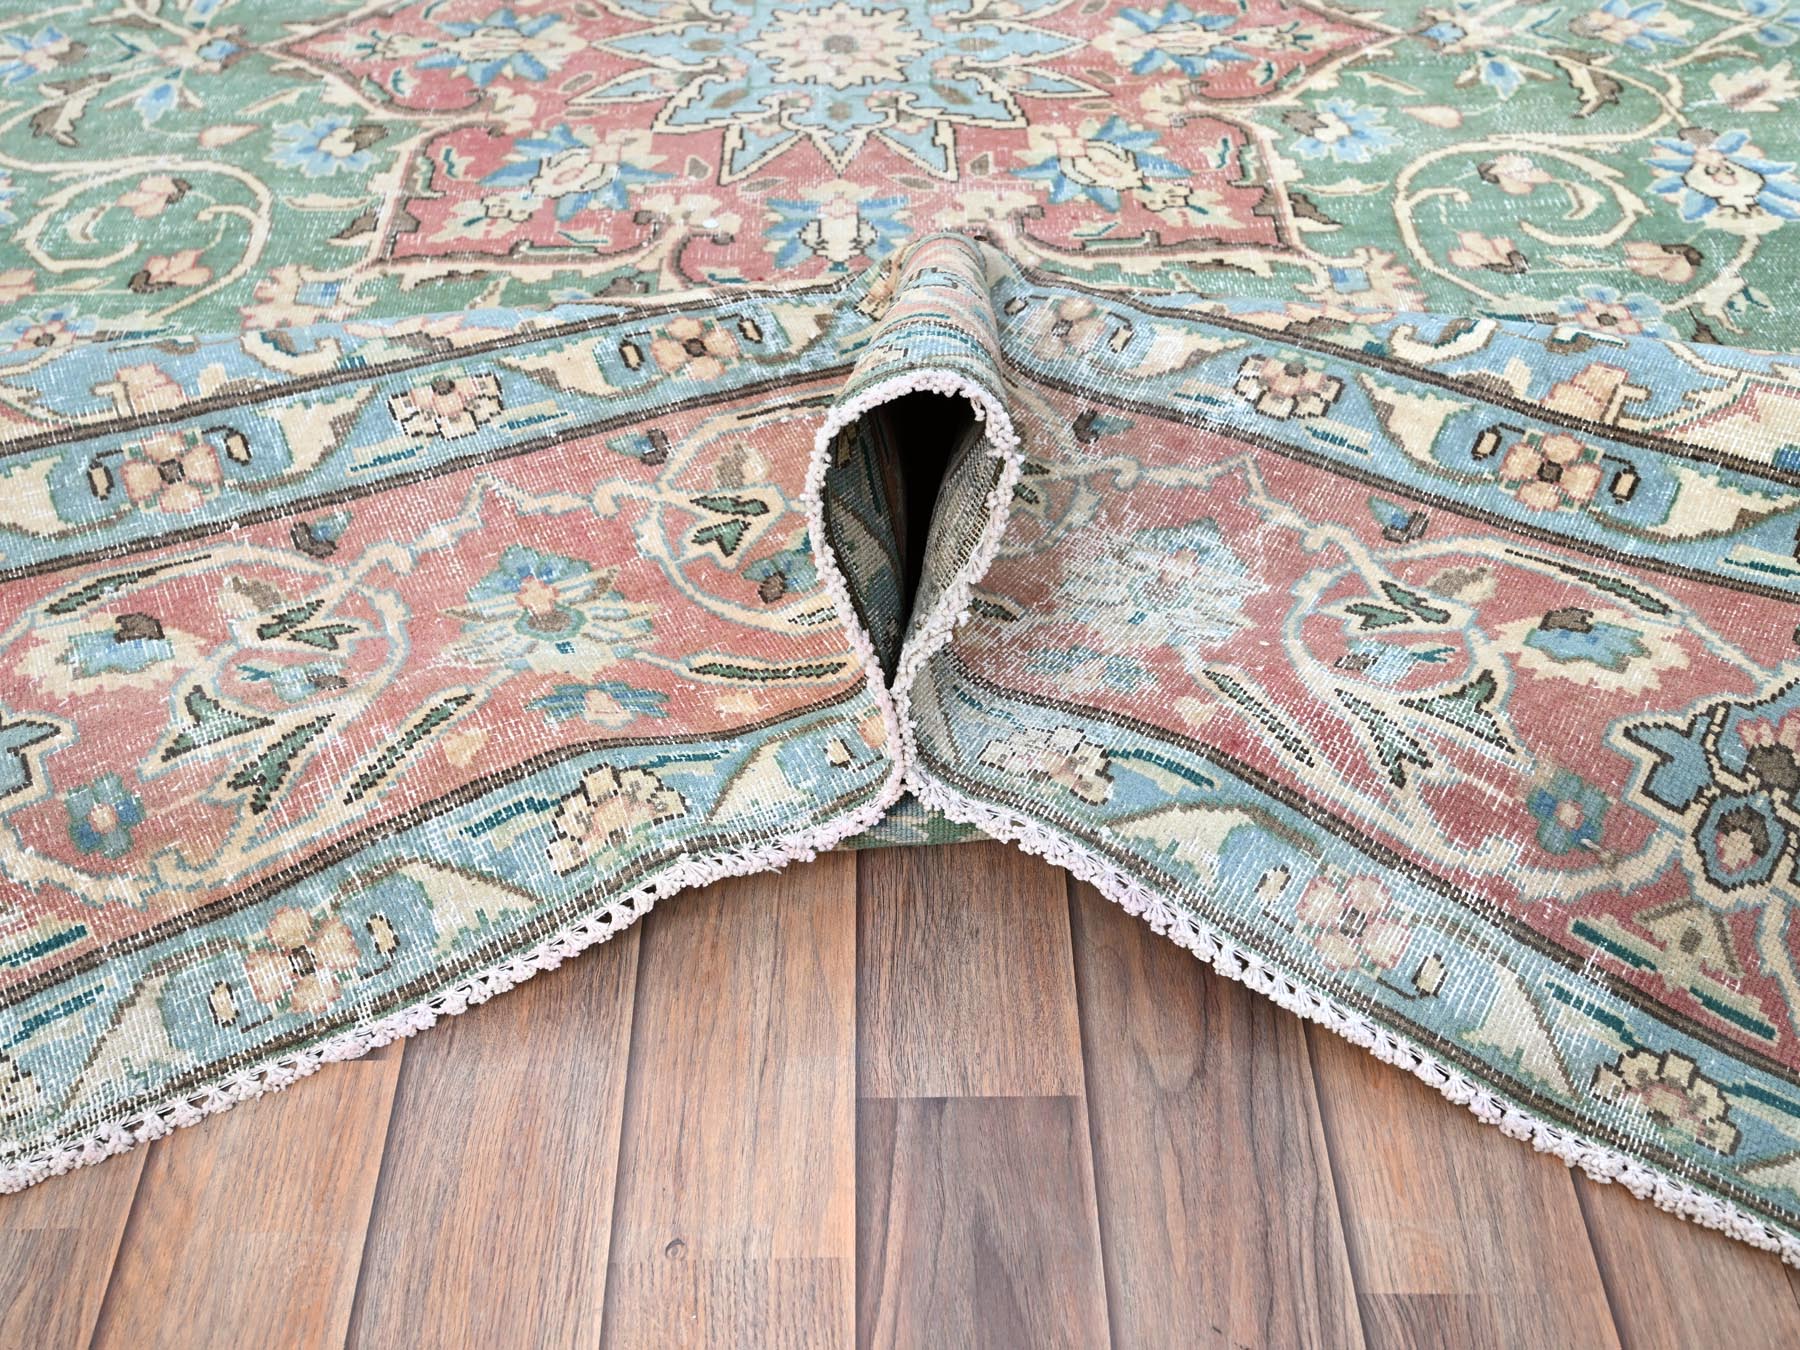 Overdyed & Vintage Rugs LUV772983